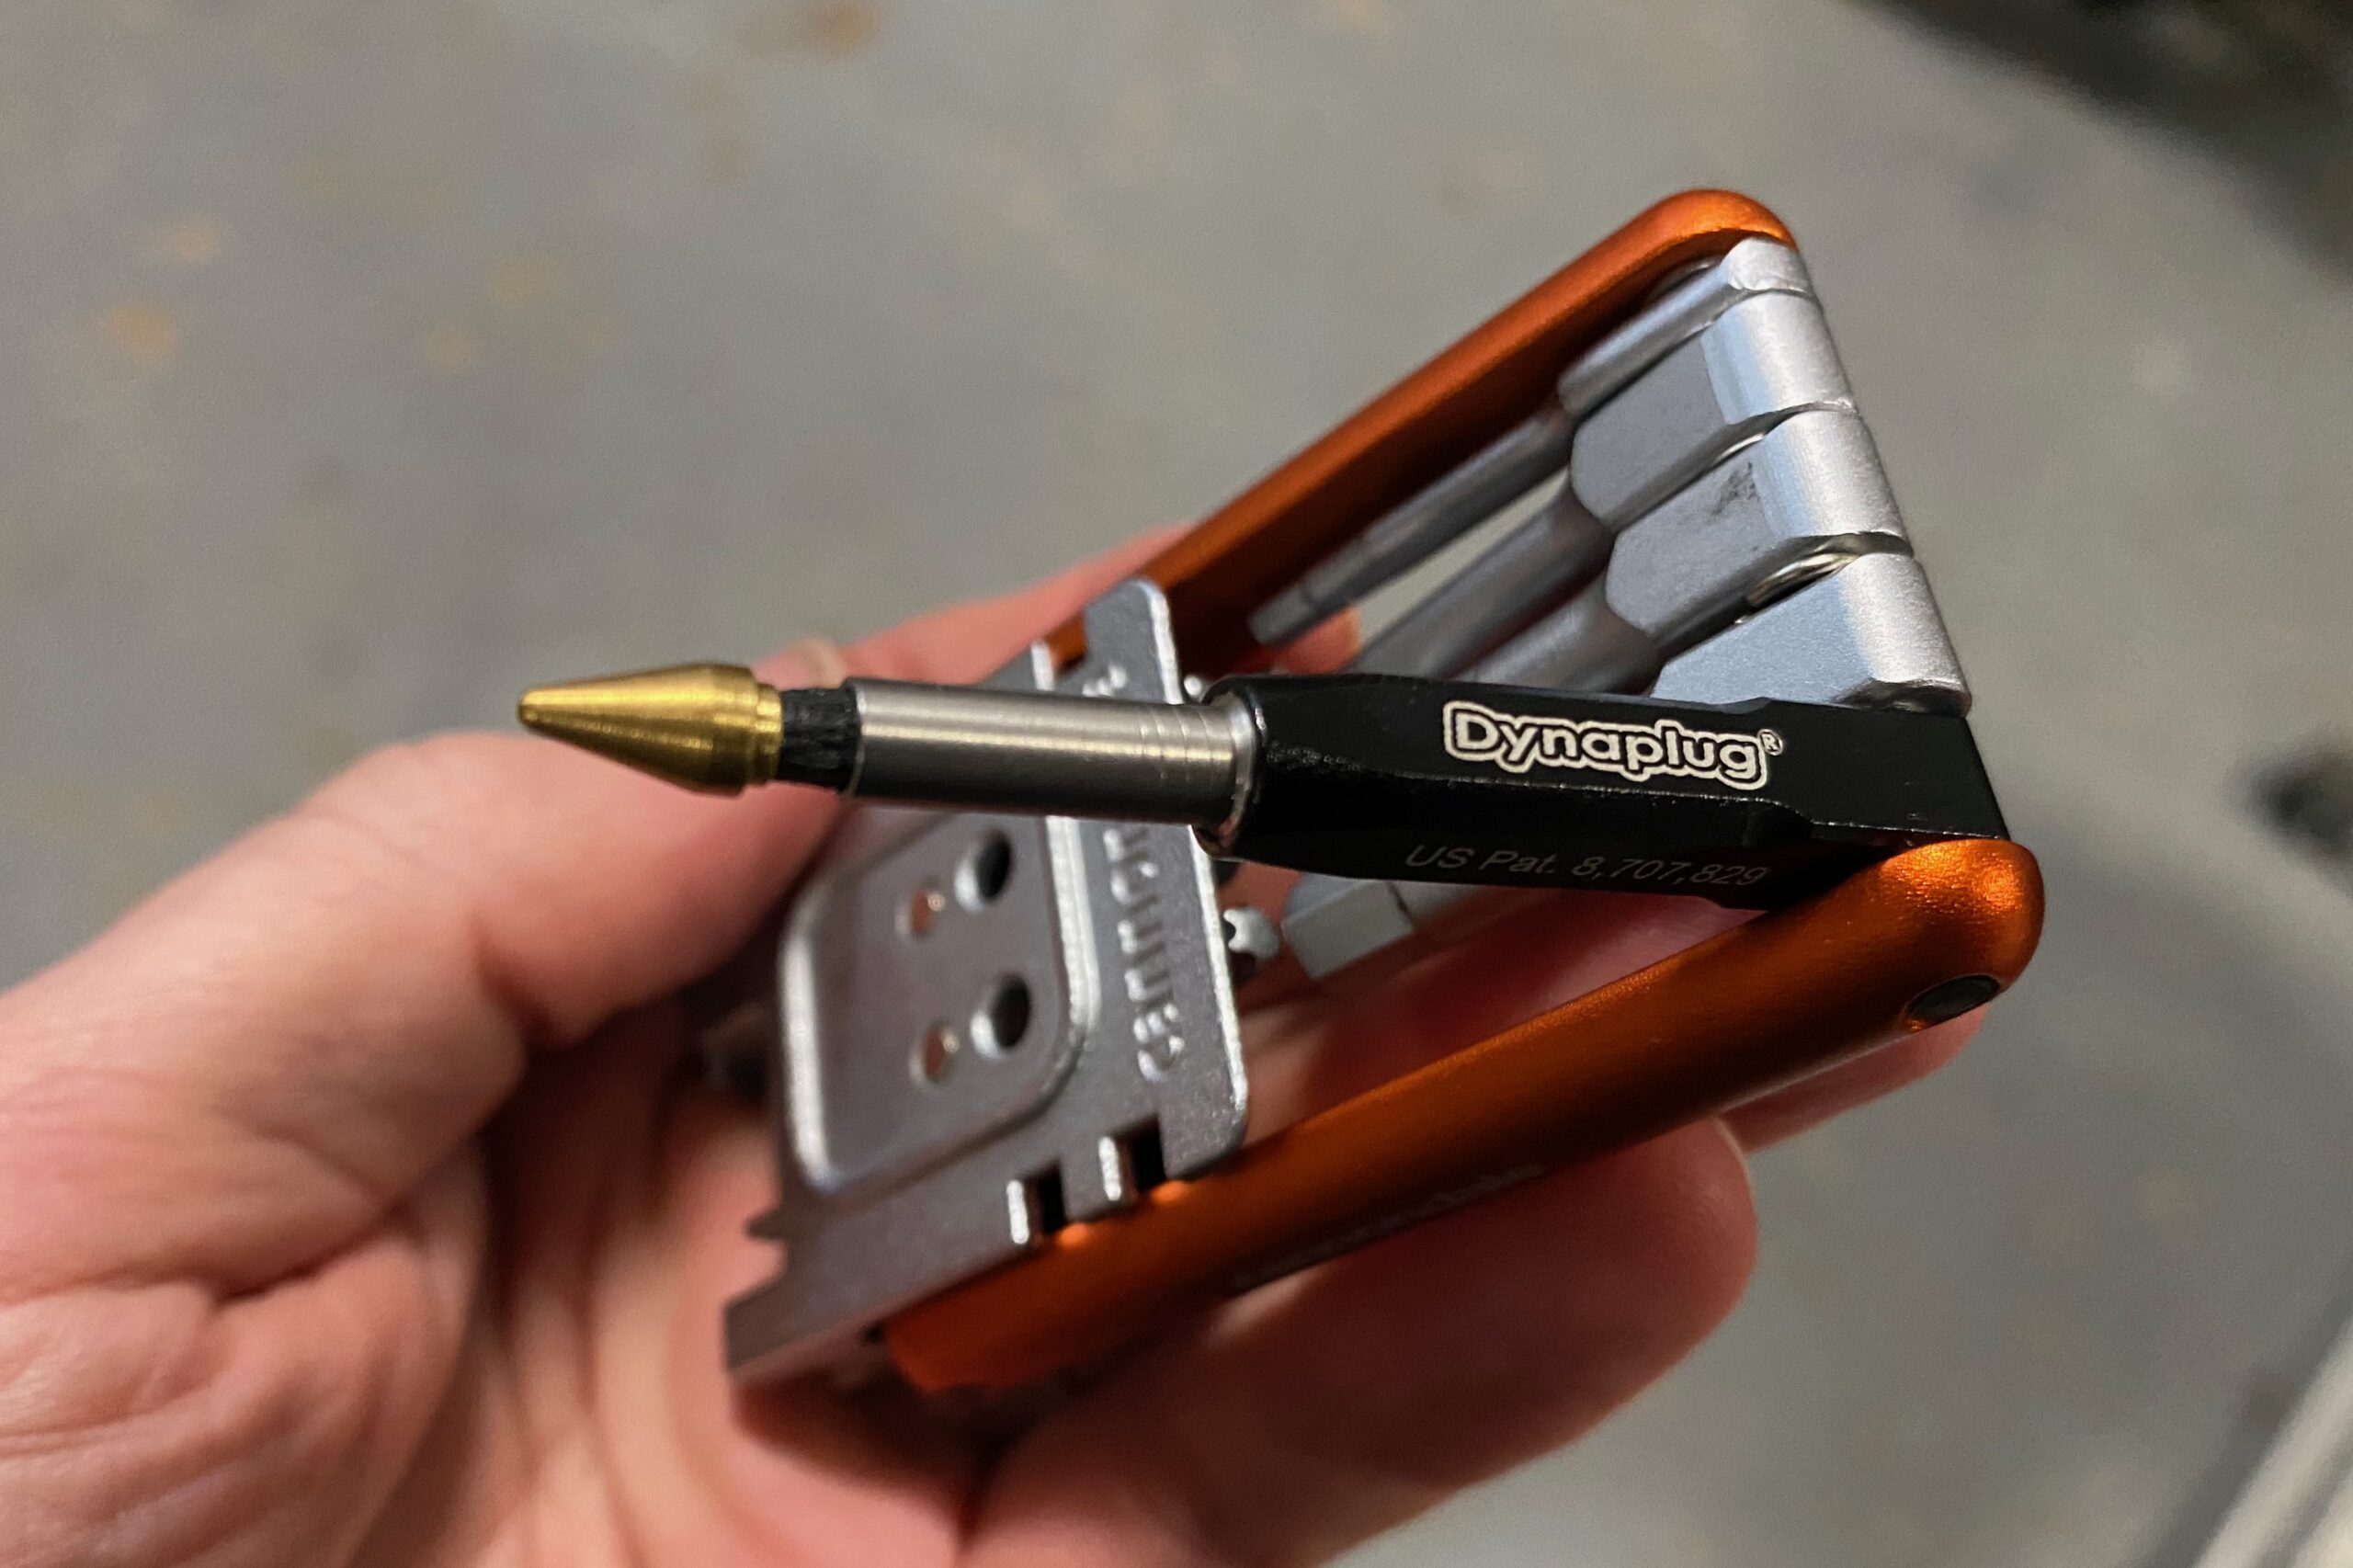 The Cannondale 18-in-1 with Dynaplug multi-tool